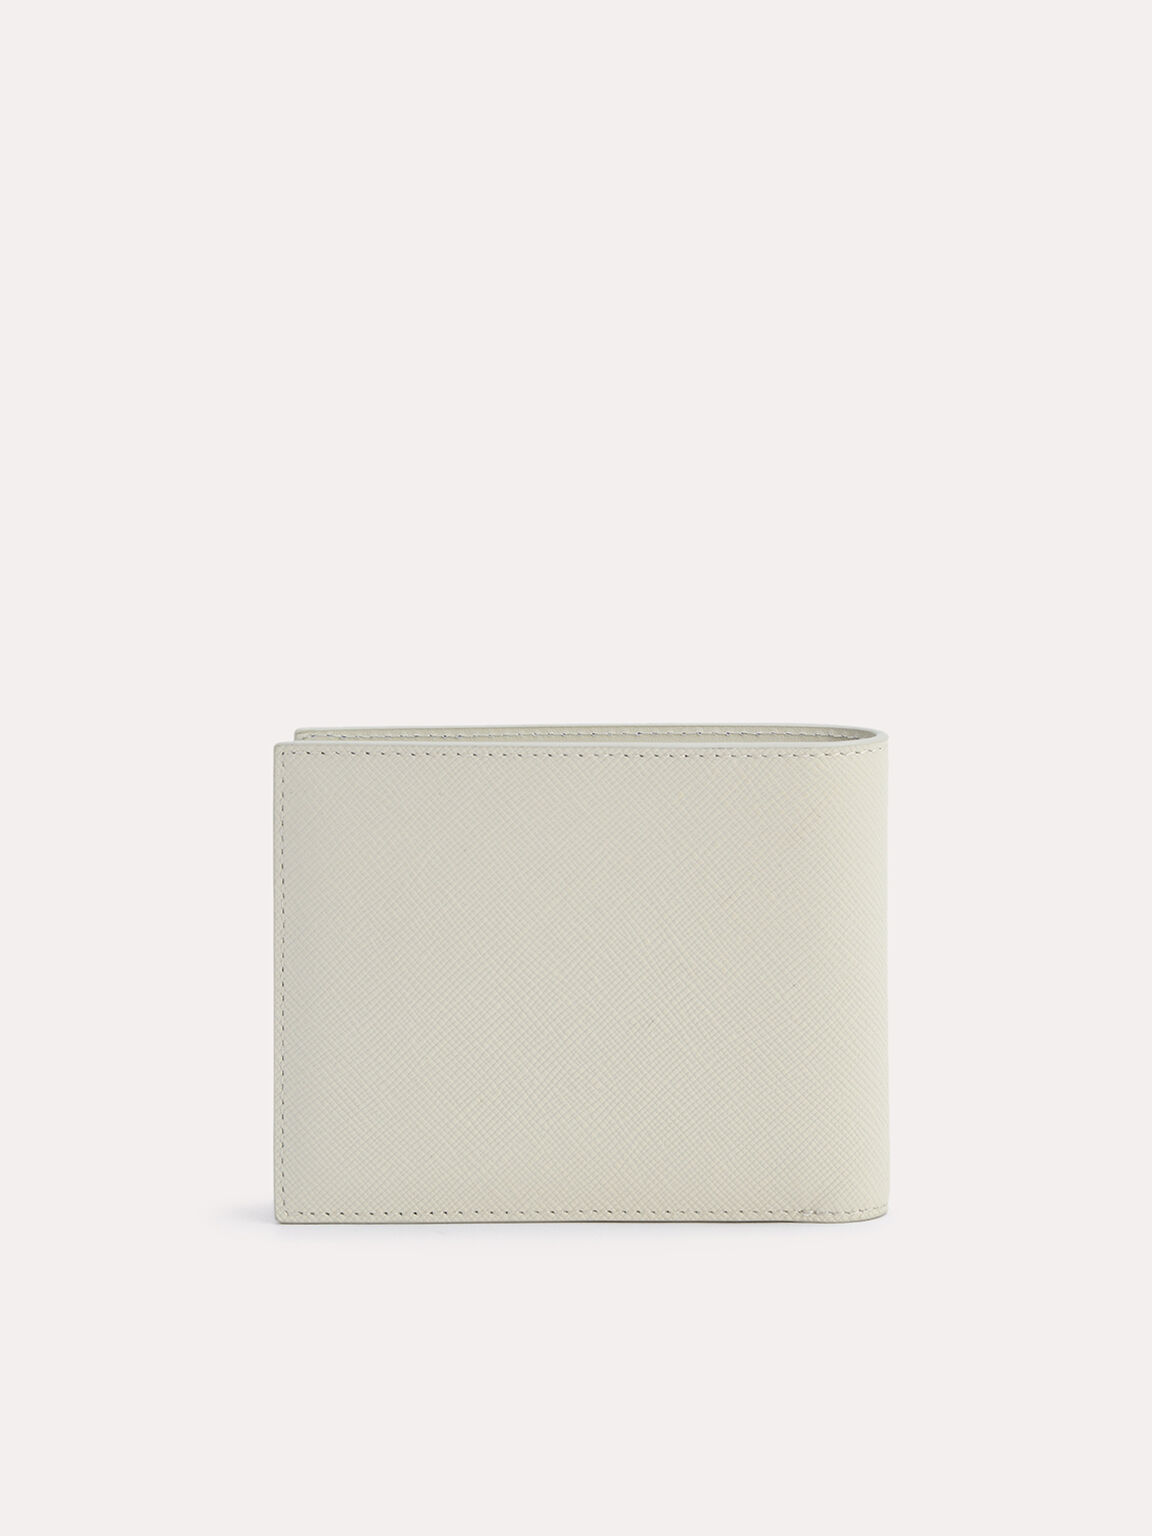 Textured Leather Bi-Fold Wallet with Insert, Chalk